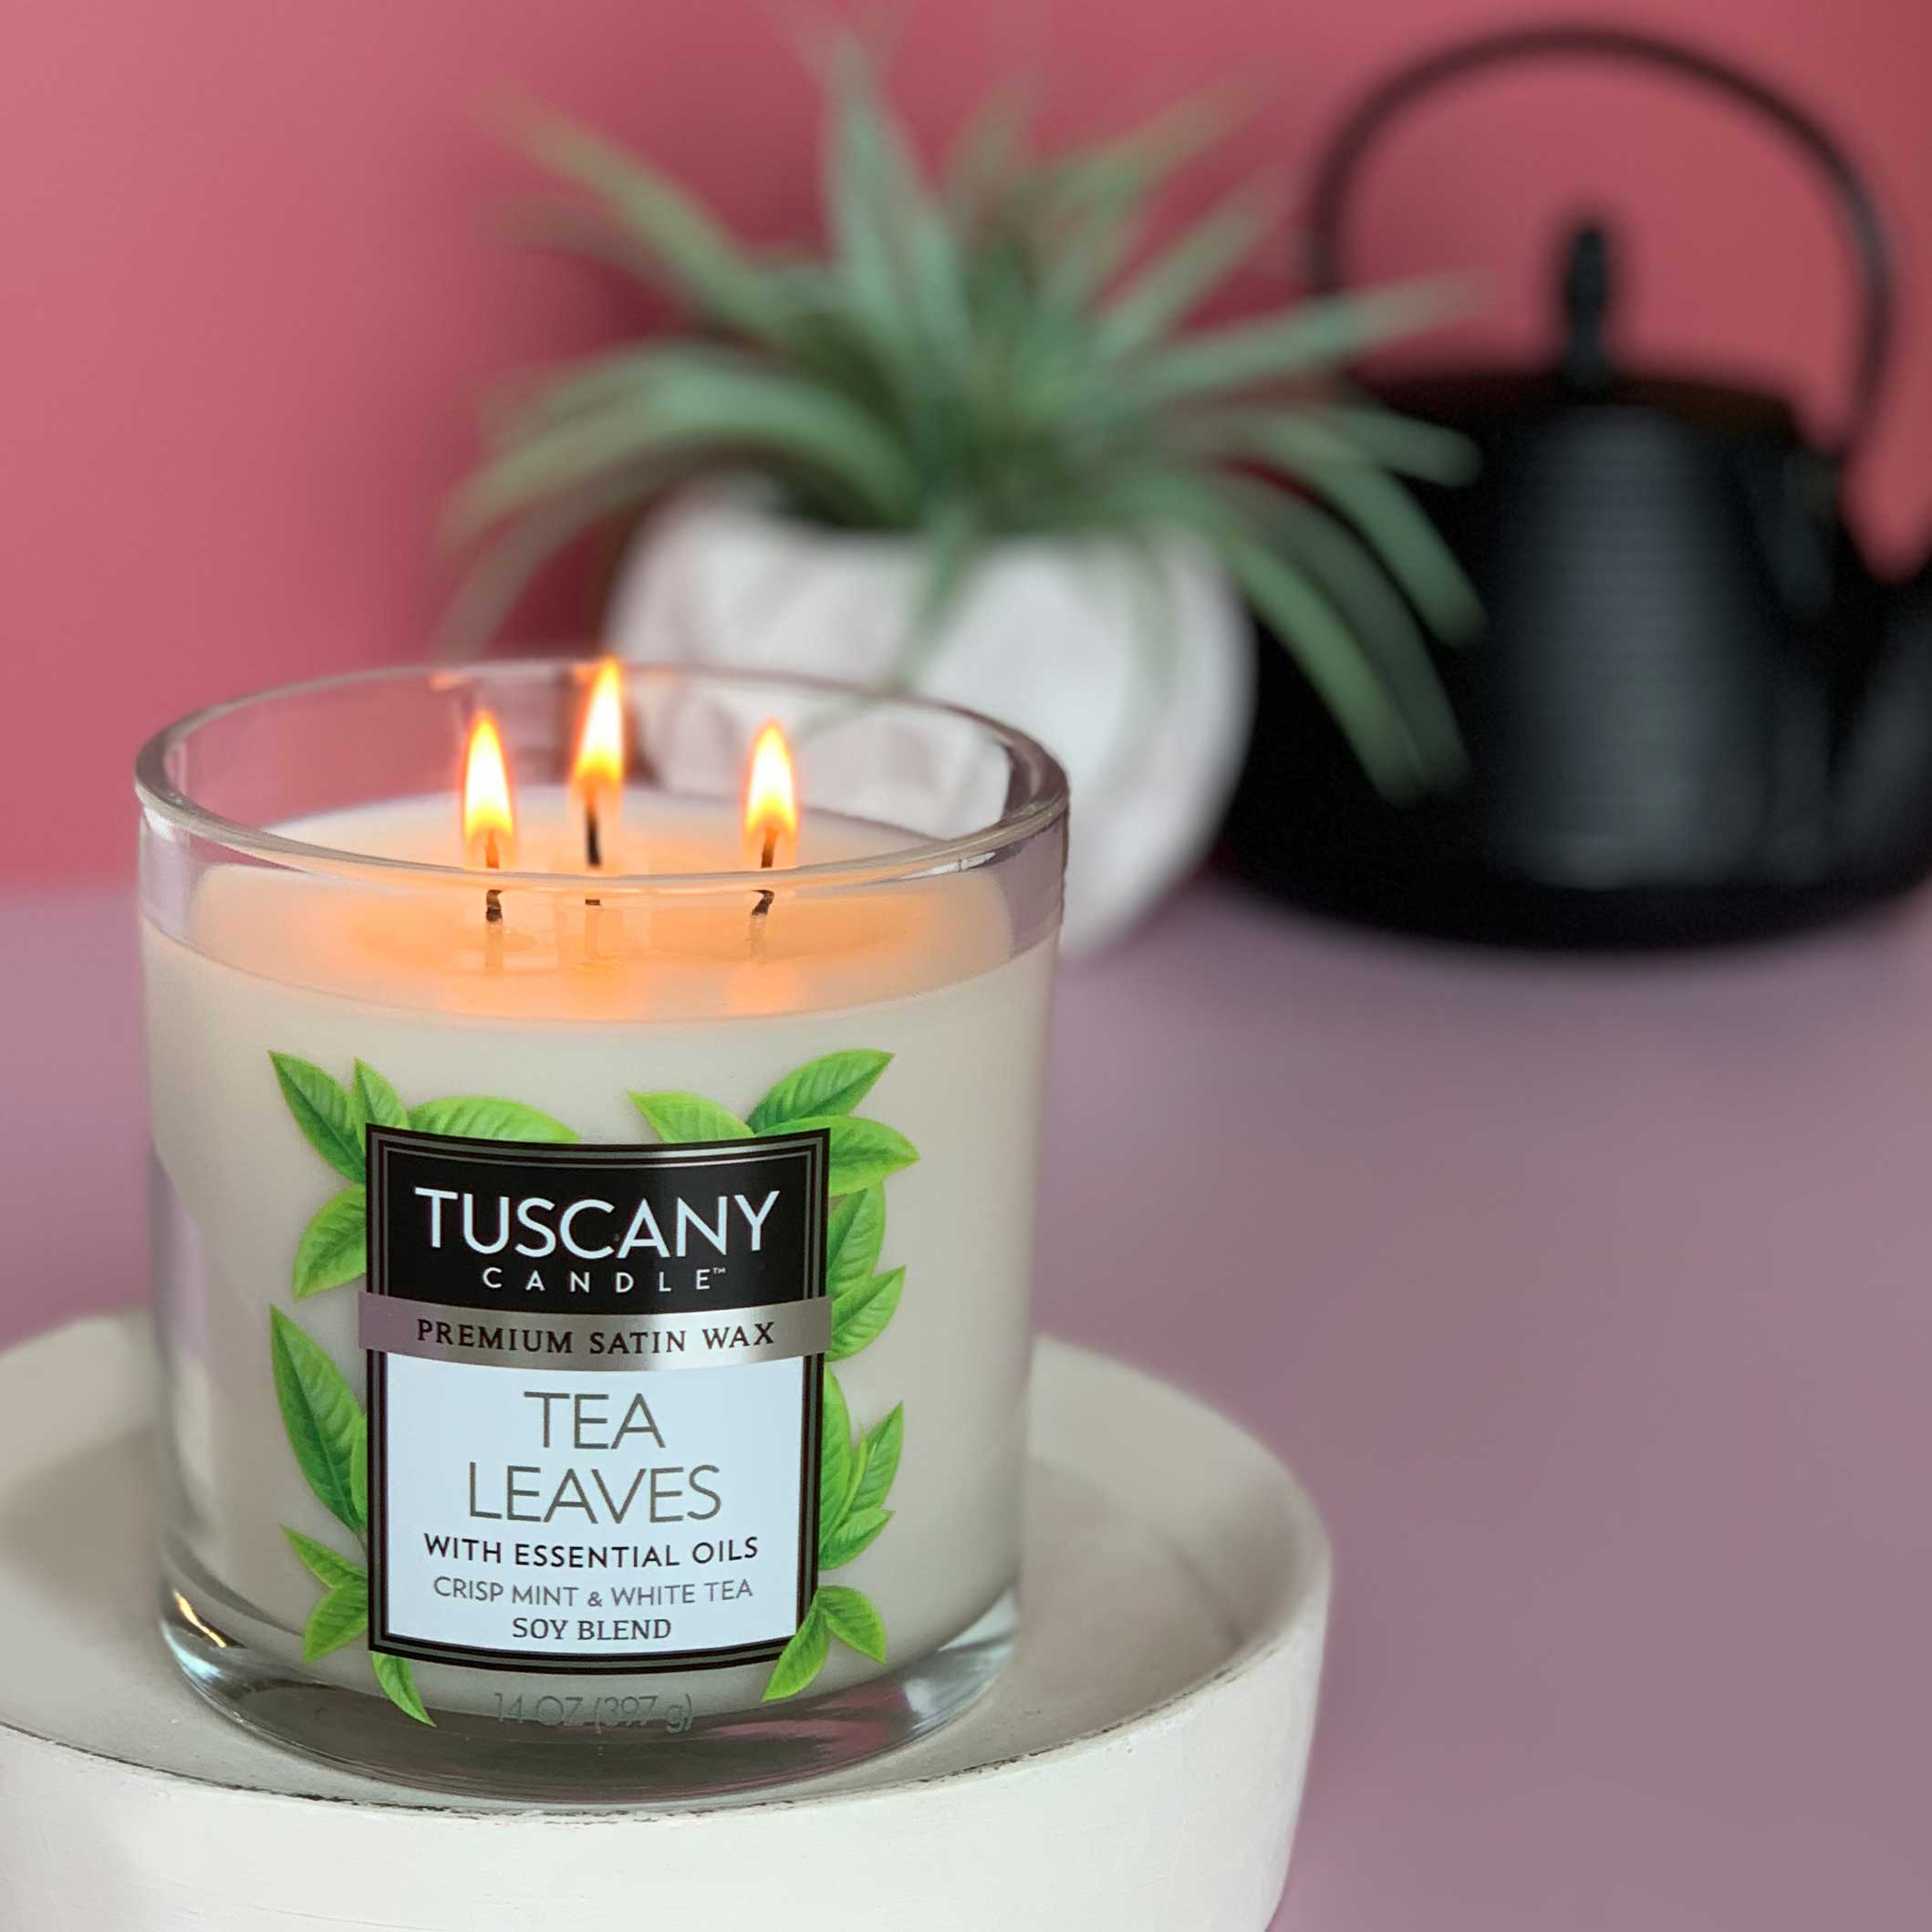 This Tea Leaves Long-Lasting Scented Jar Candle (14 oz) by Tuscany Candle is made with a soy-blend wax for a truly indulgent experience.